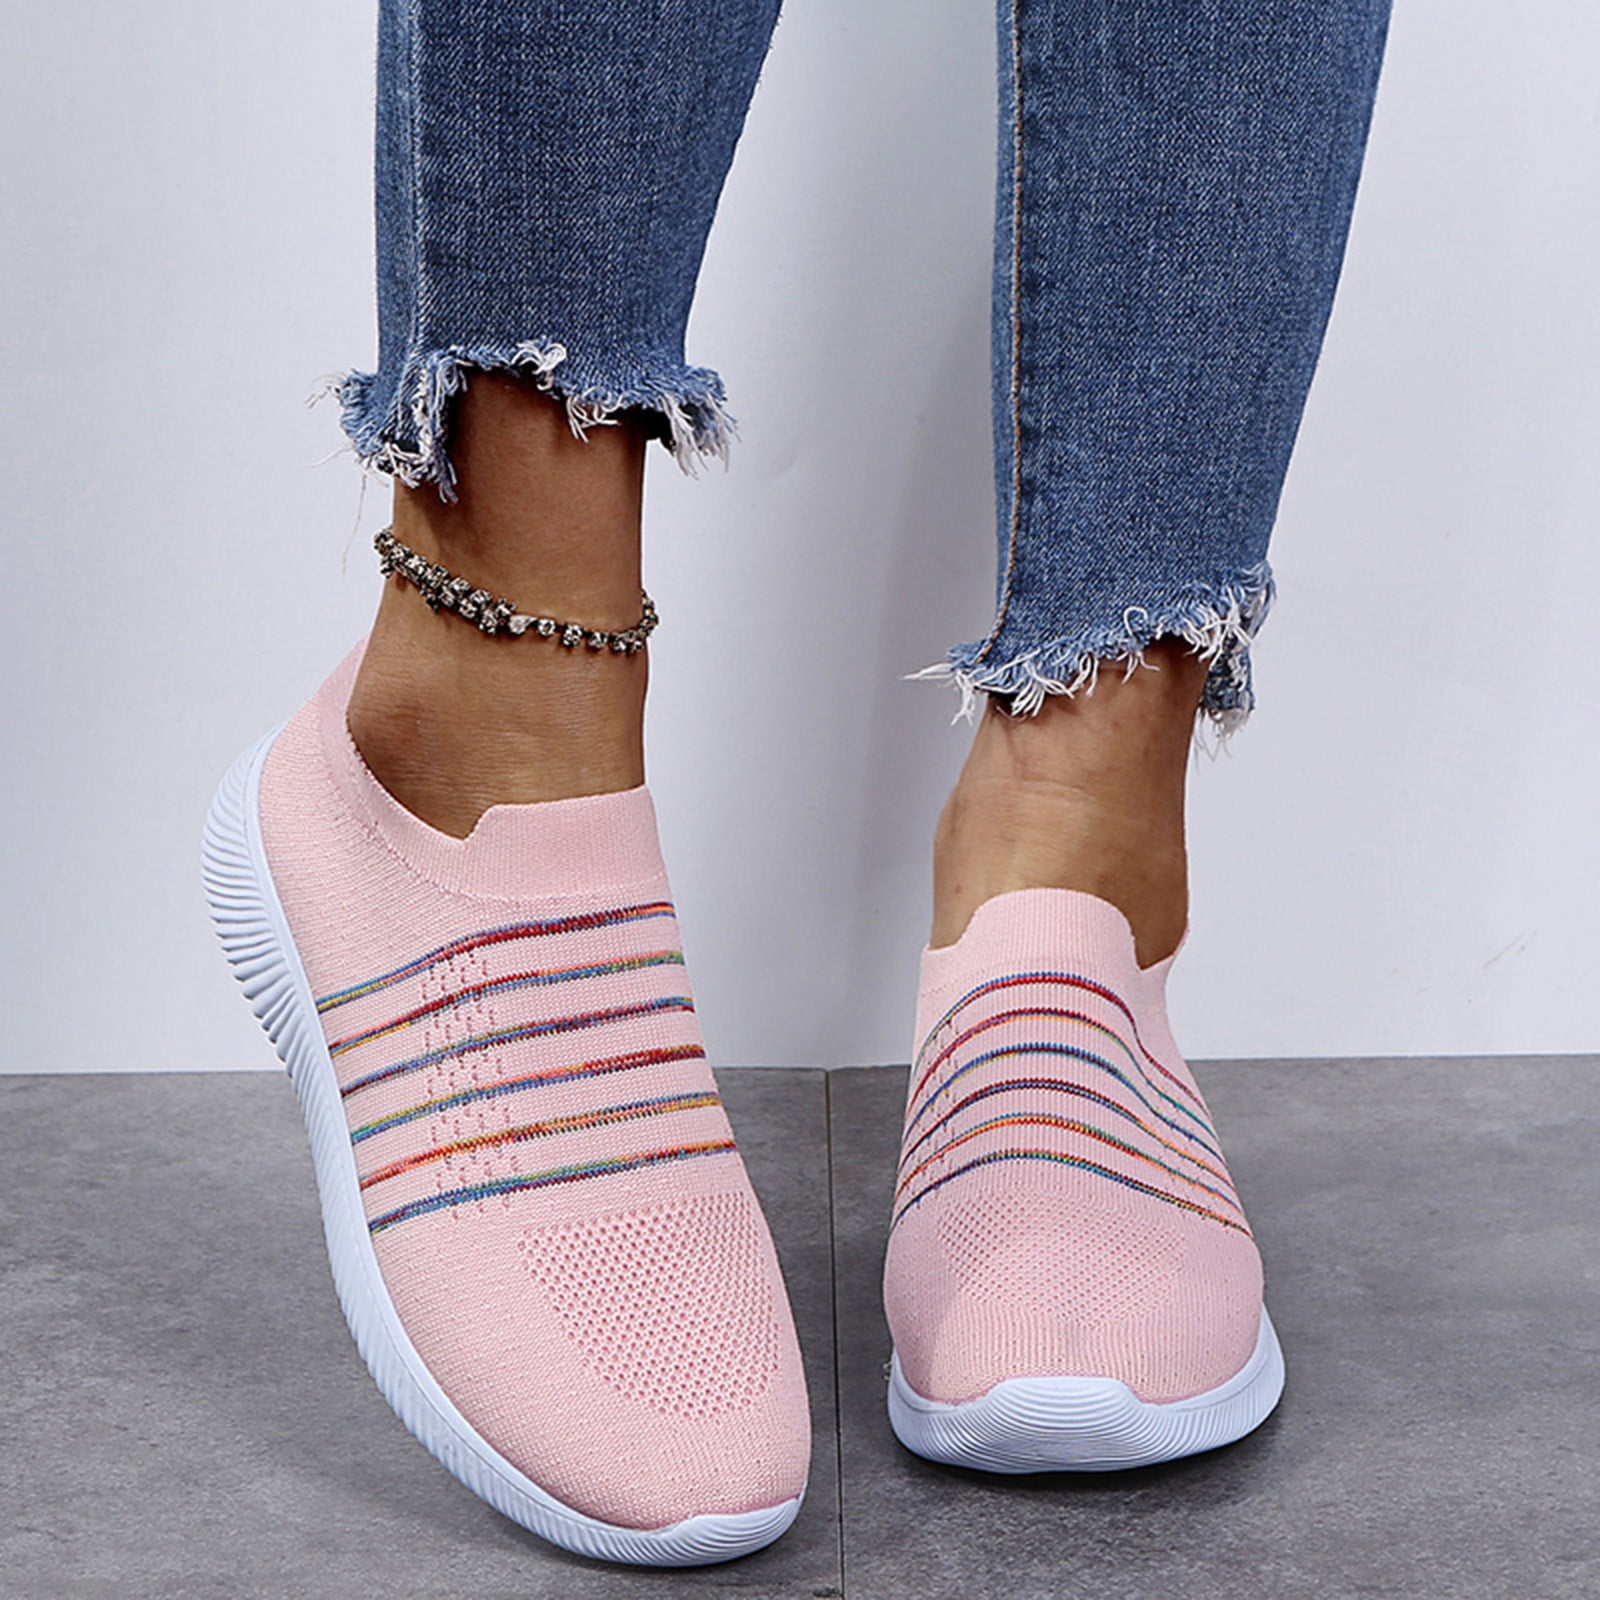 Lhked Women's Fashion Casual Mesh Breathable Slip On Sneakers Loafers ...